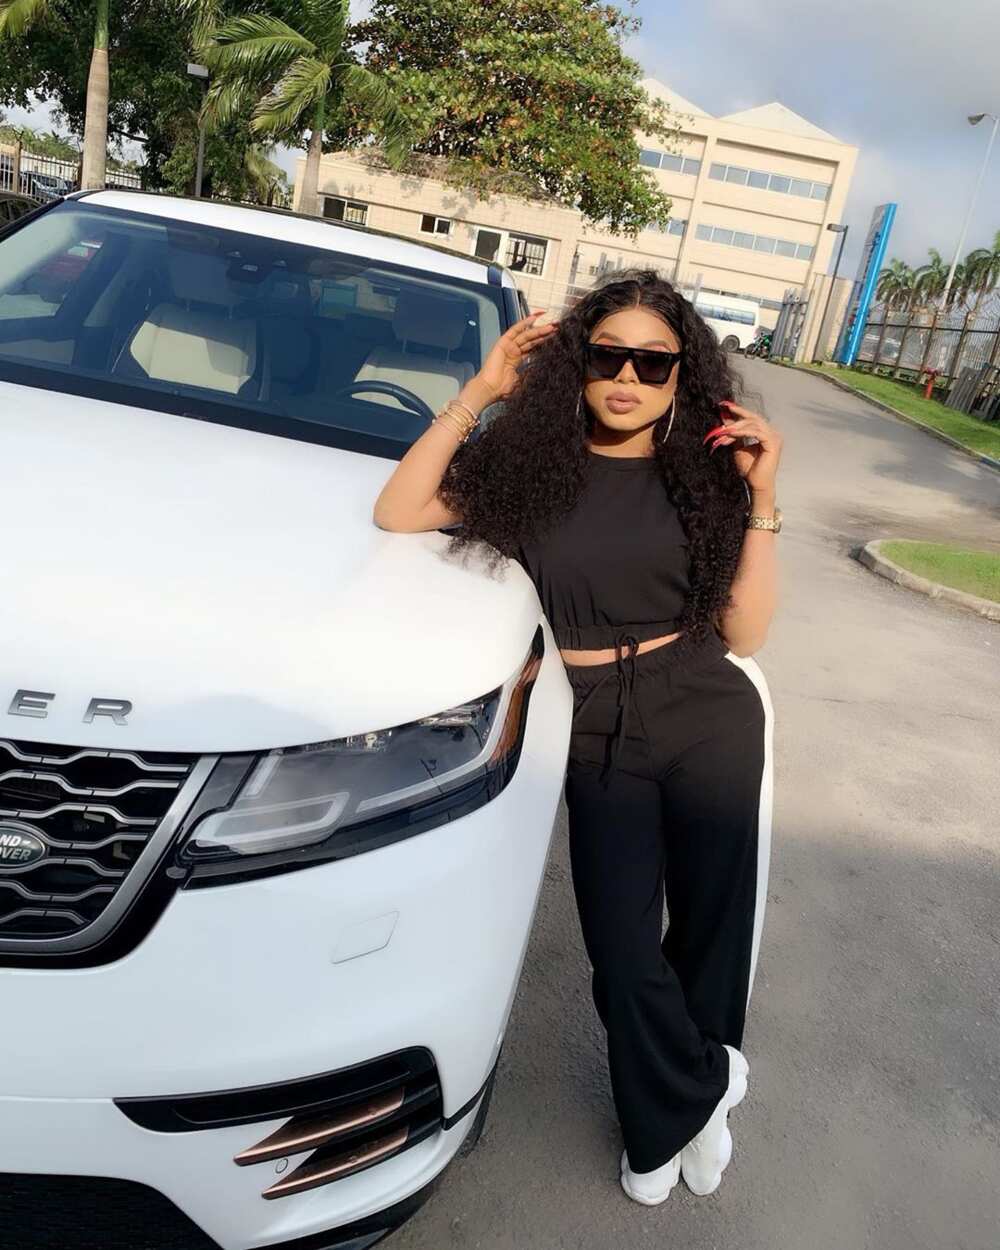 Bobrisky shows off keys to his 3 luxury cars, generator remote control spotted